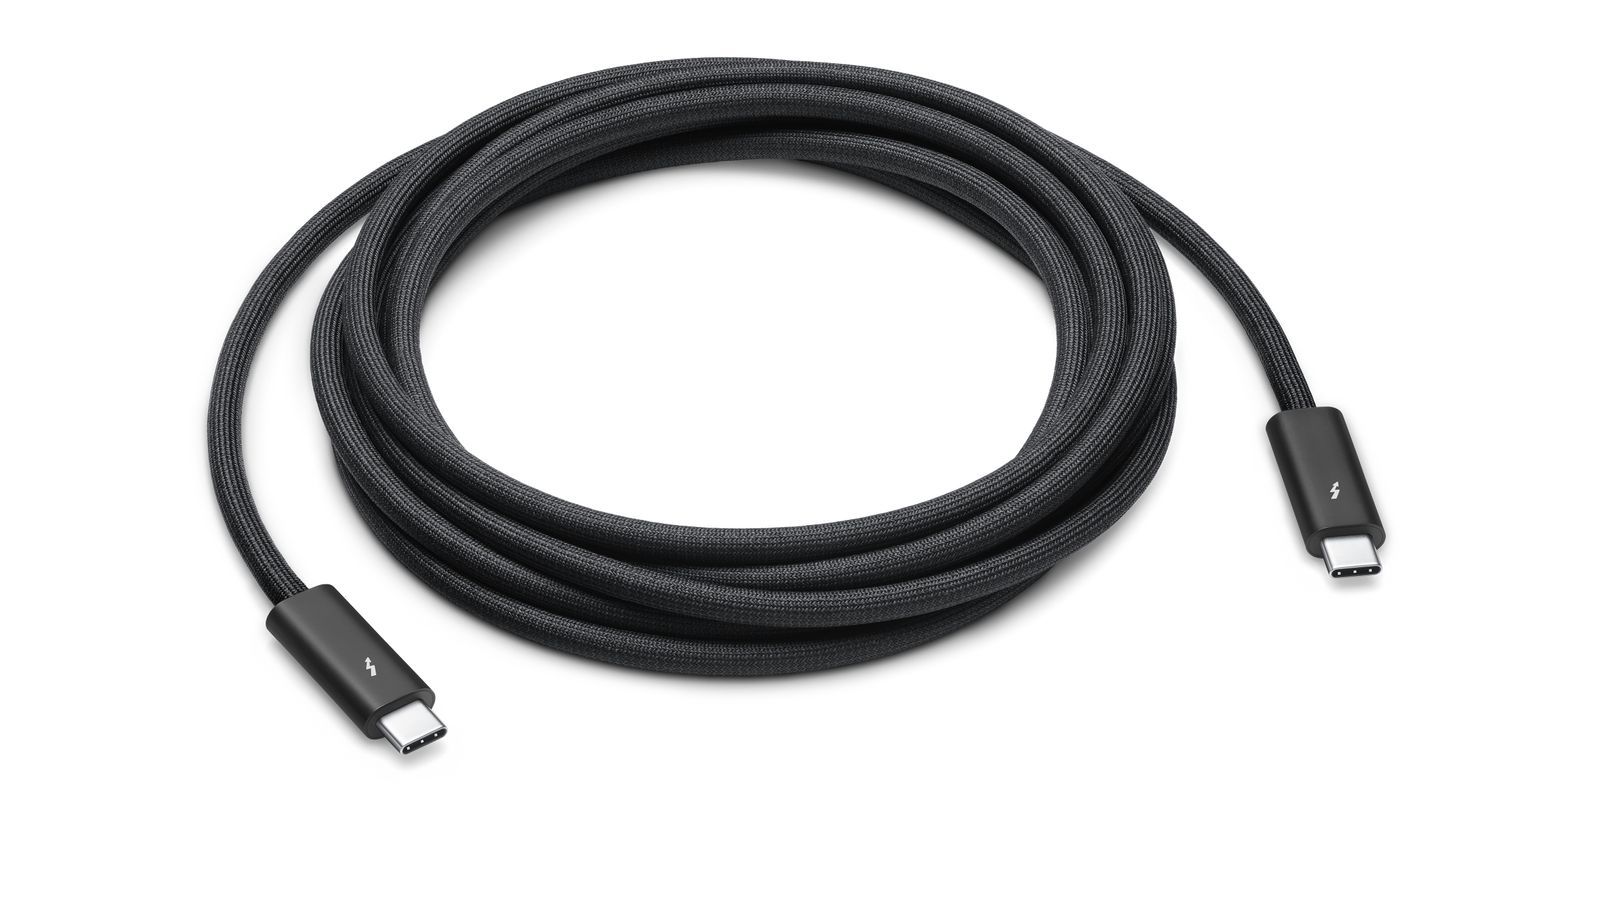 Apple’s New Studio Show Contains 1-Meter Thunderbolt Cable With 3-Meter Possibility Coming Quickly